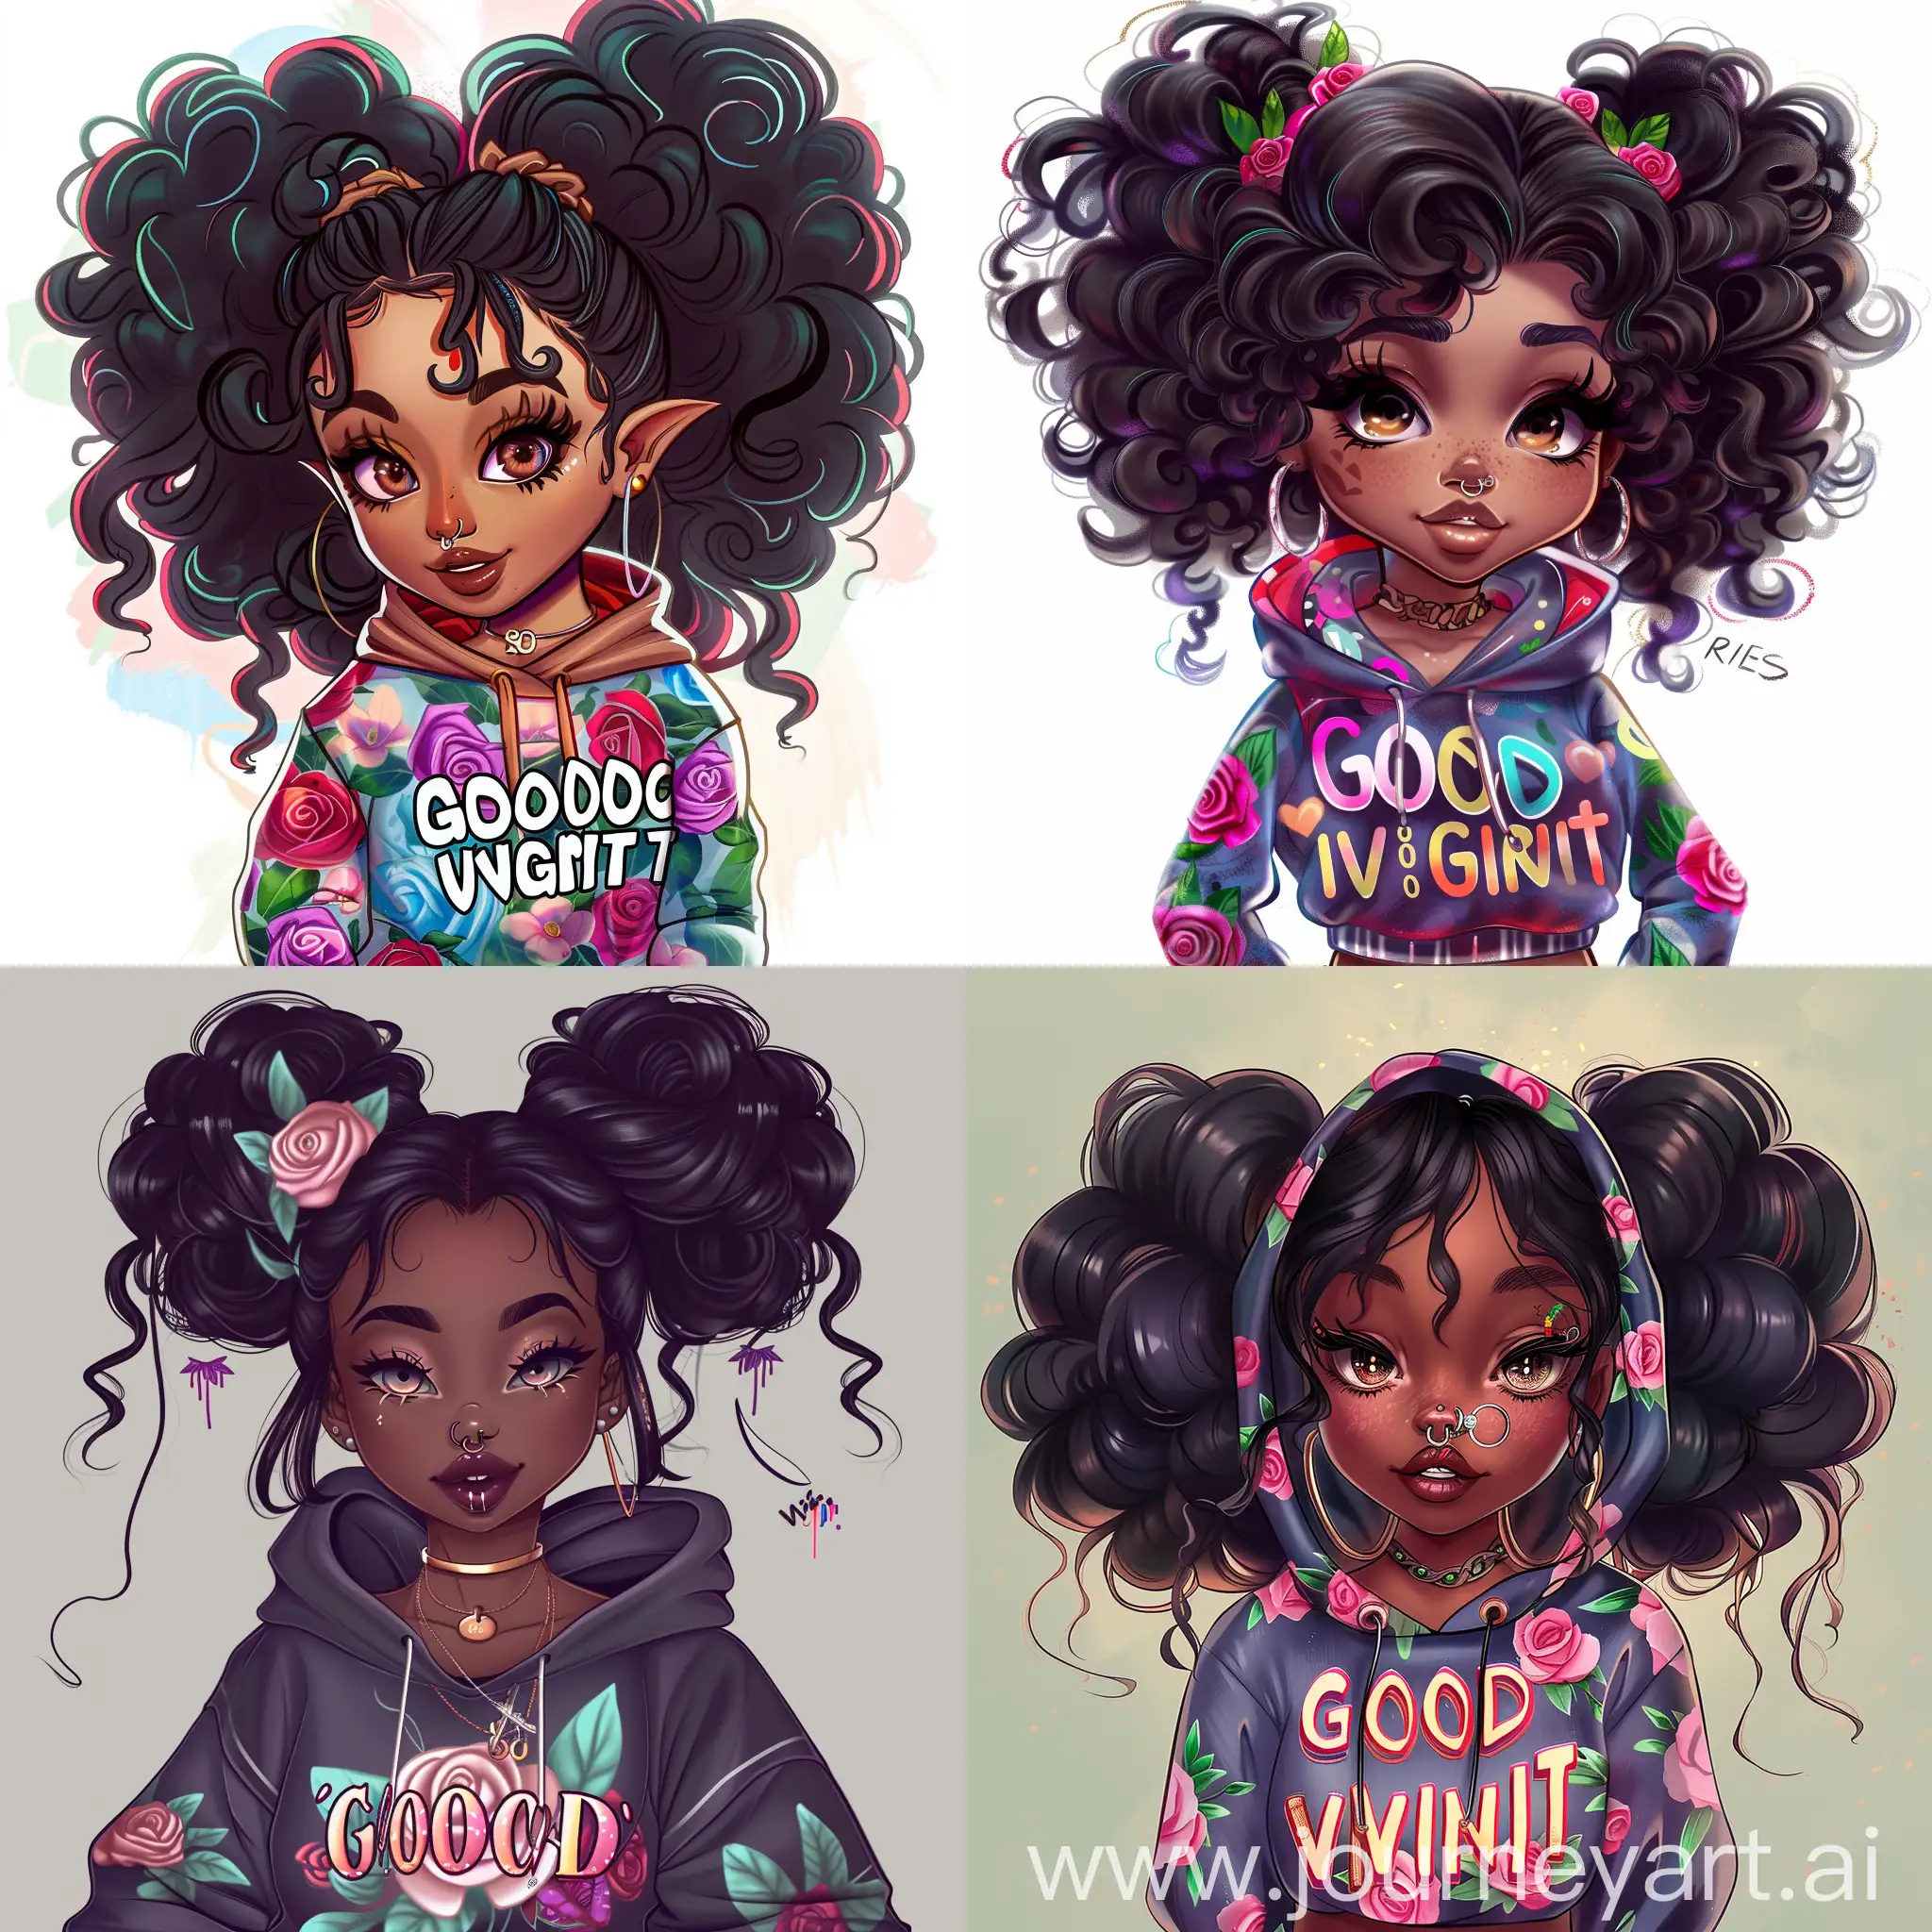 Adorable-Black-Ebony-Afro-Chibi-Manga-Girl-with-Good-Vibes-Queen-Design